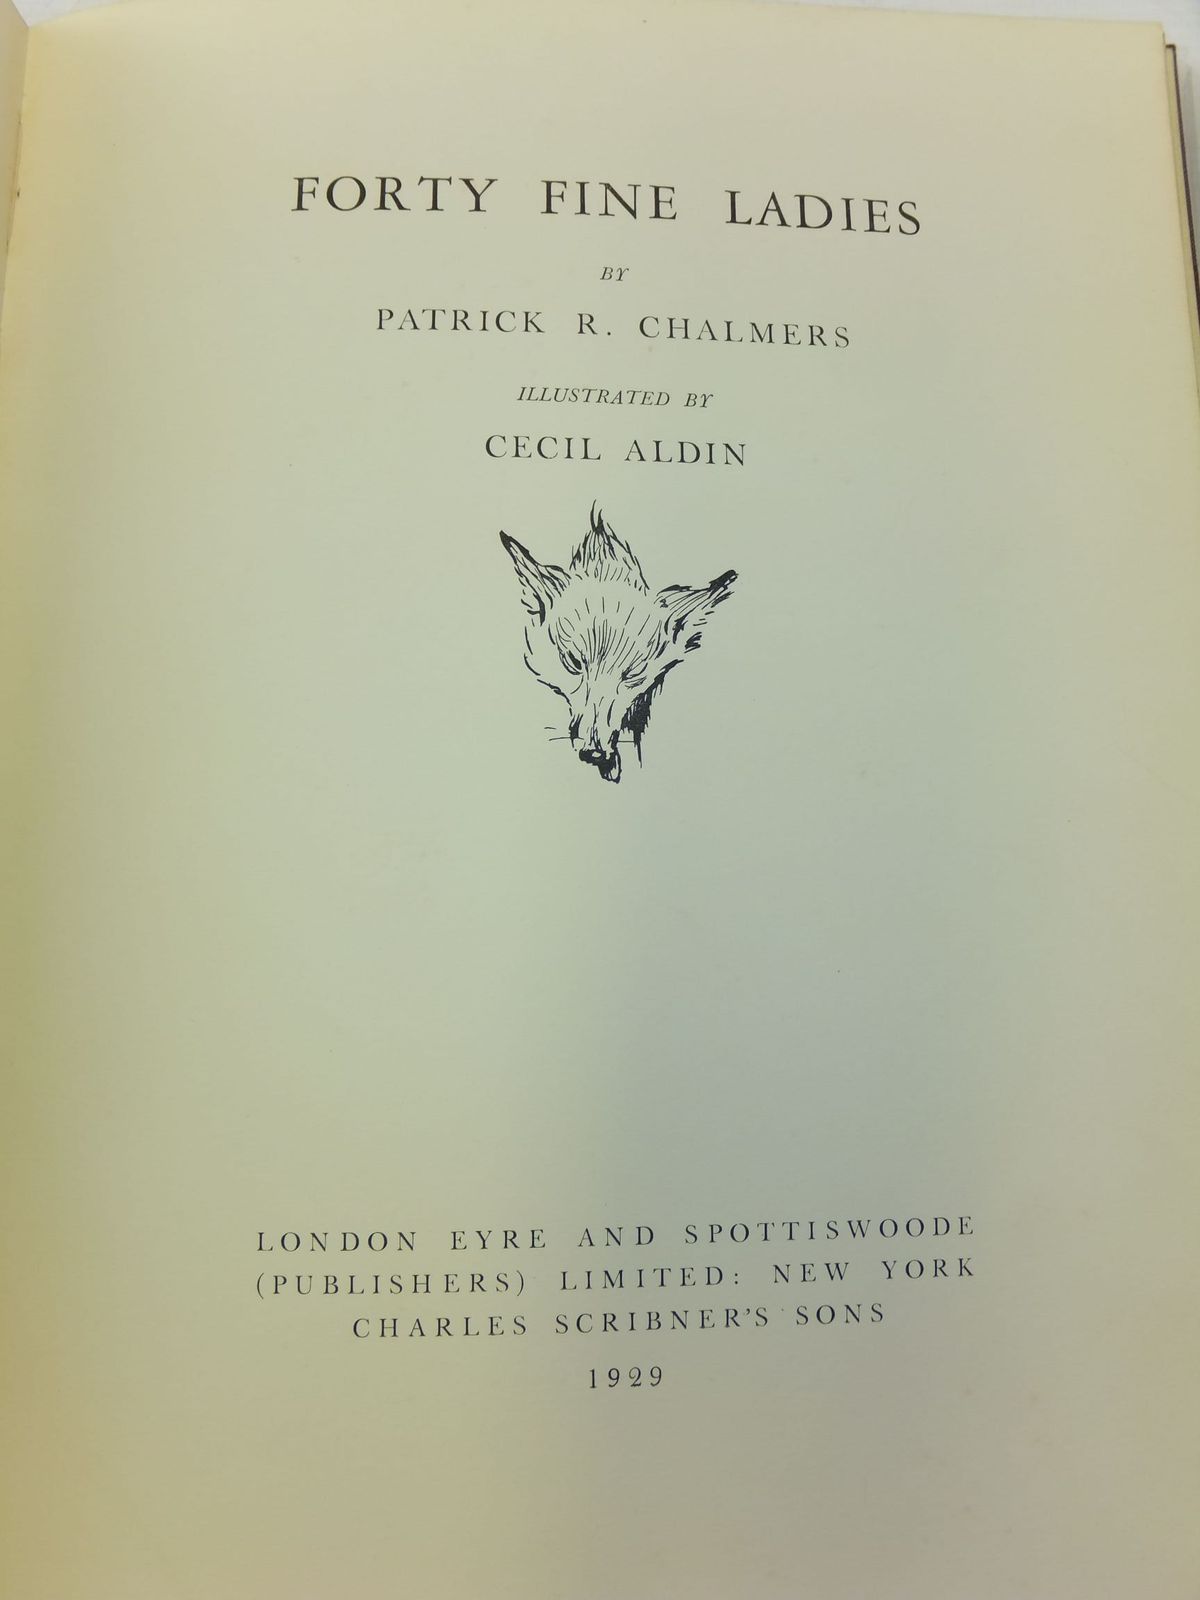 Photo of FORTY FINE LADIES written by Chalmers, Patrick R. illustrated by Aldin, Cecil published by Eyre & Spottiswoode (STOCK CODE: 1109160)  for sale by Stella & Rose's Books